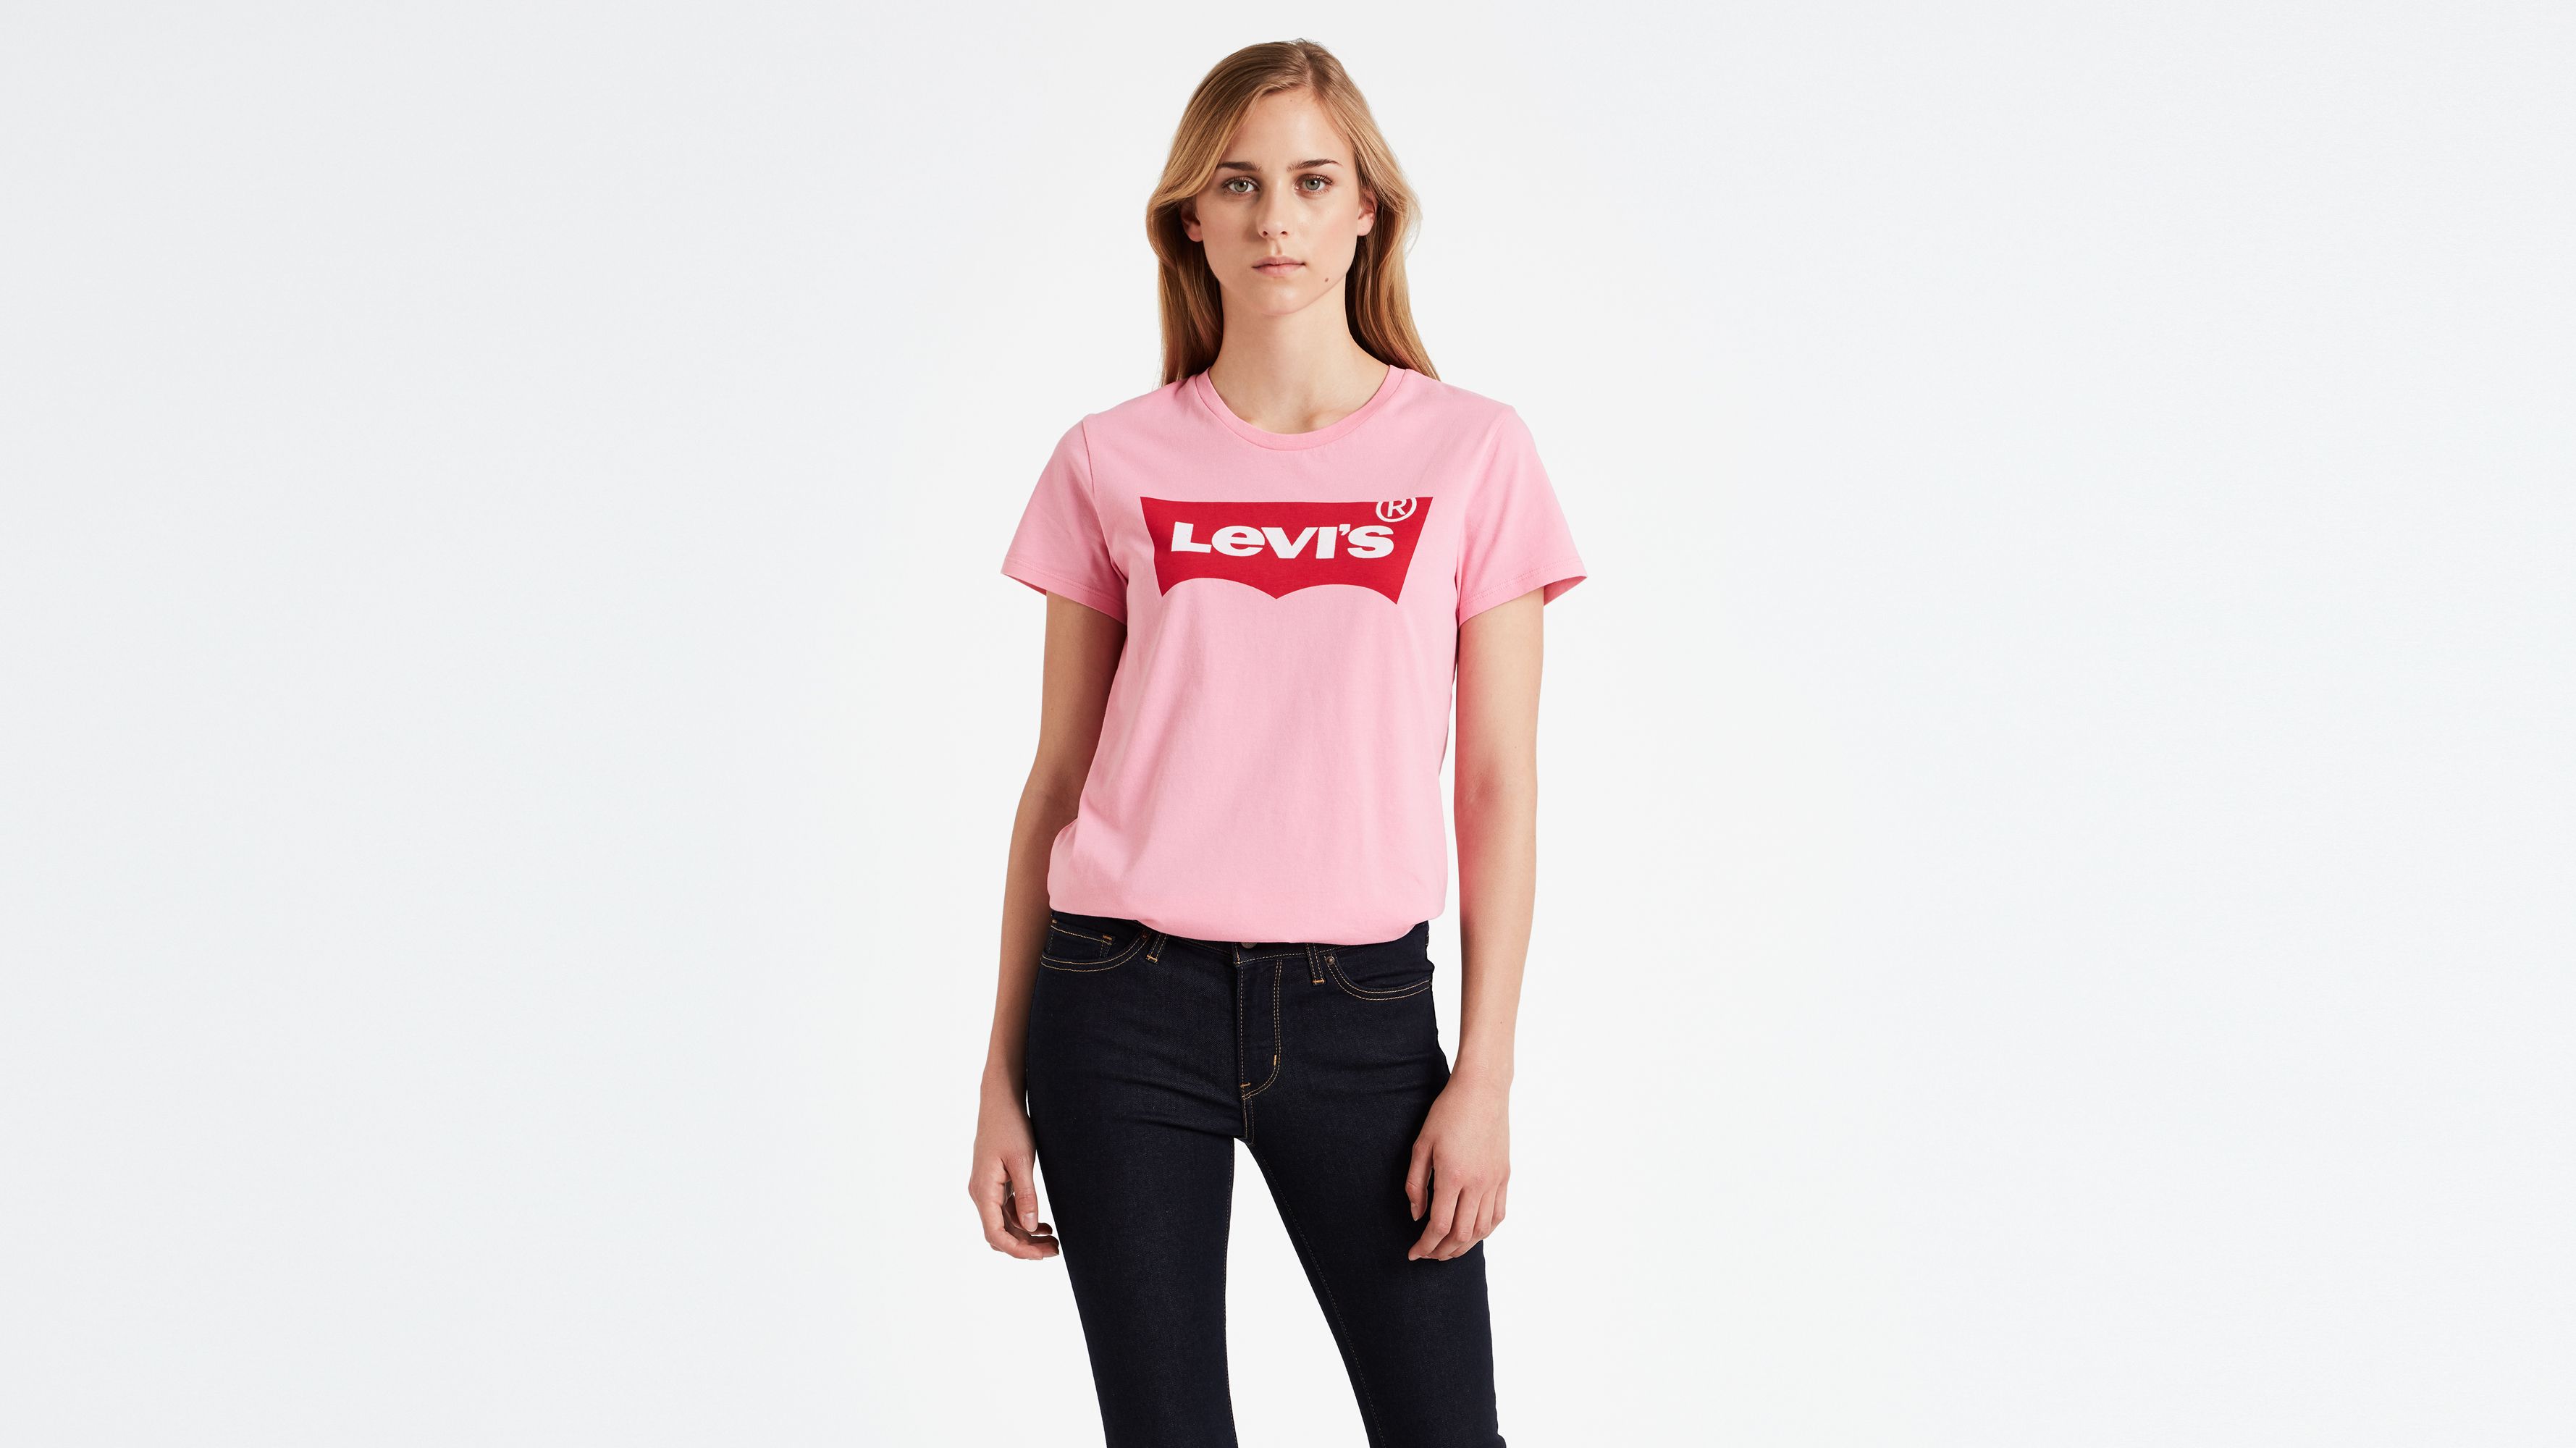 pink and red levis t shirt